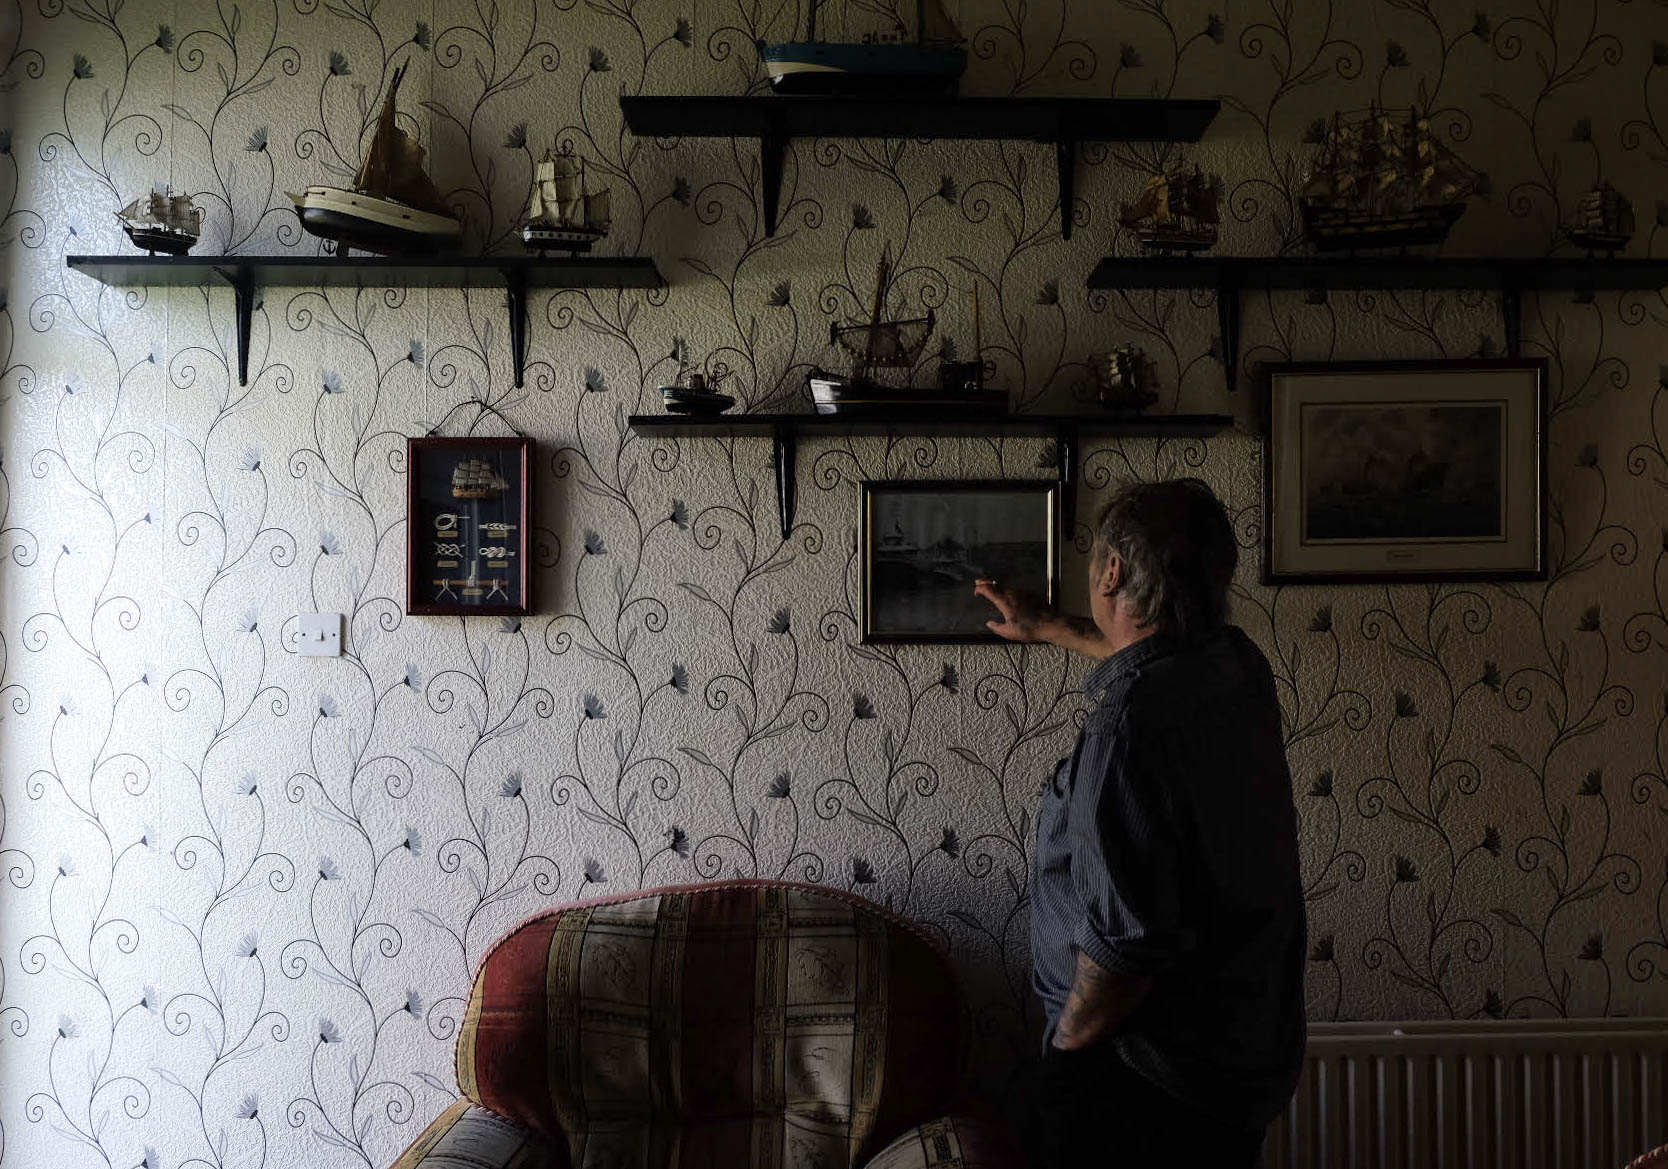 Retired fisherman Peter Cole, 62, points to an old photograph of the local docks at his home in Grimsby, U.K., on May 27, 2016.